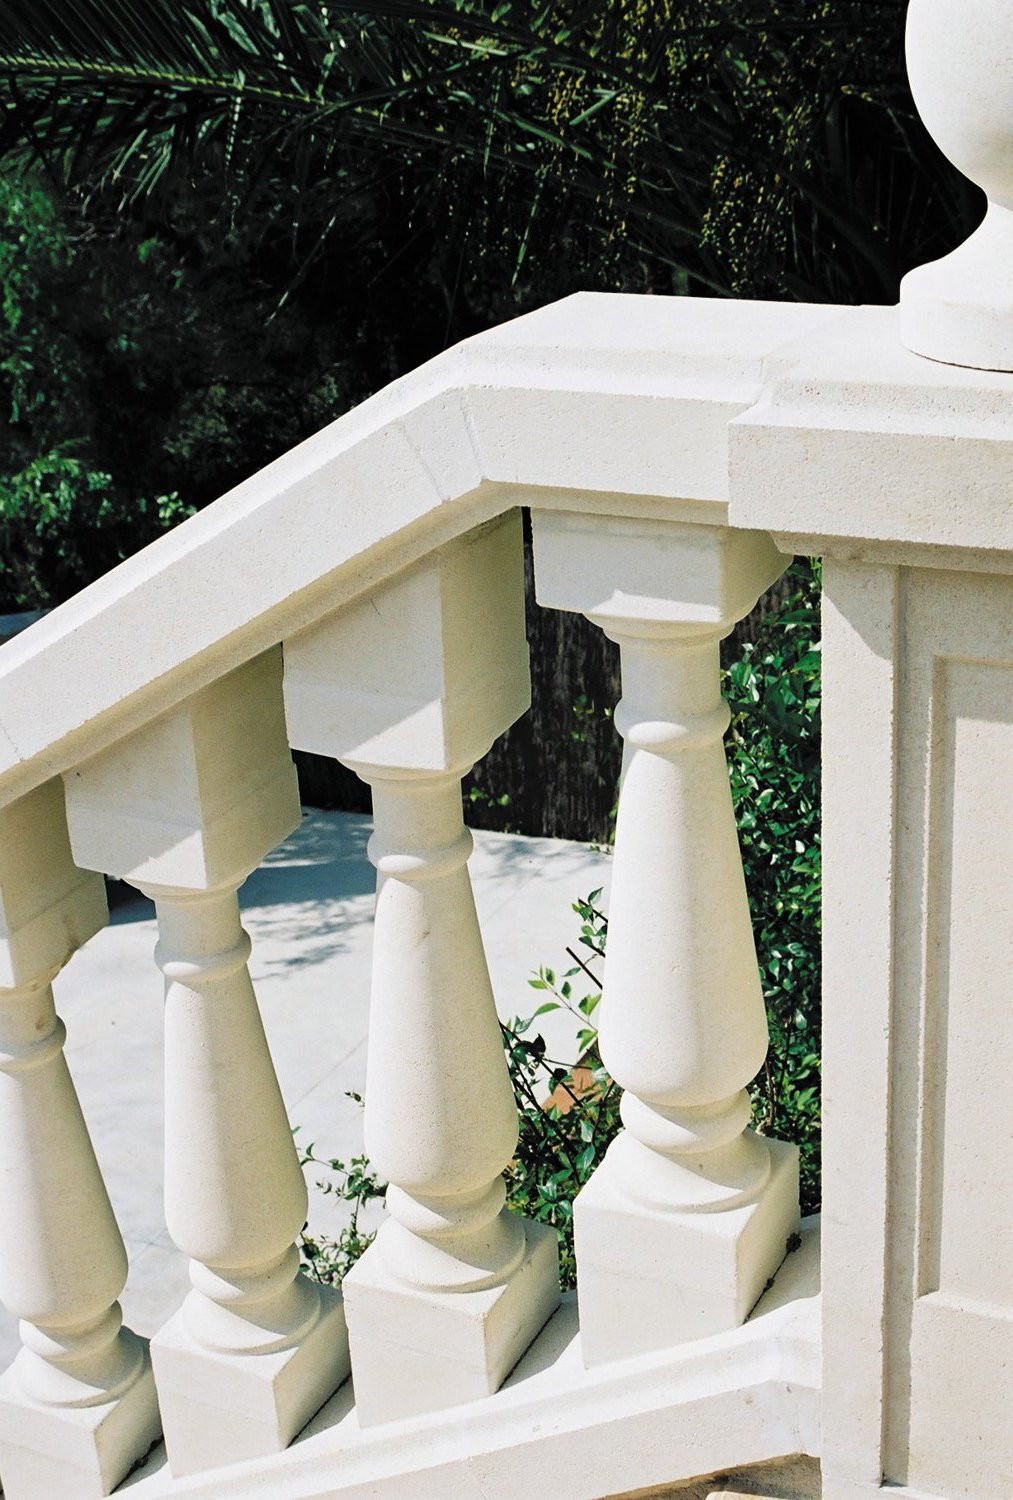 Wedge block for balusters